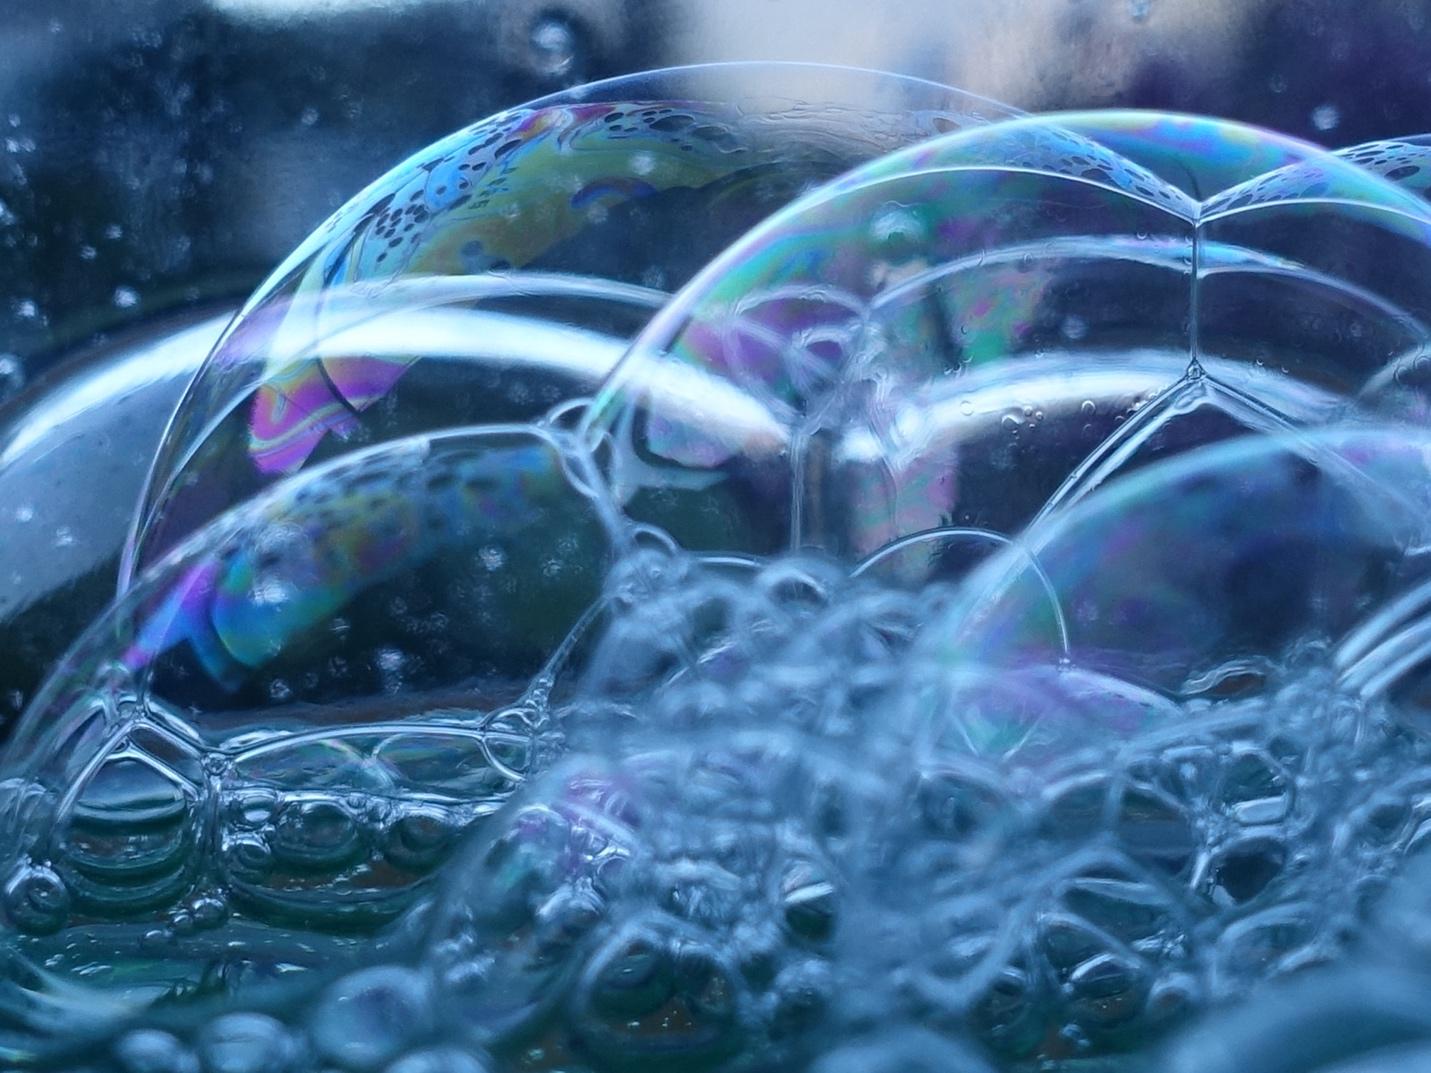 bubbles from a washing machine